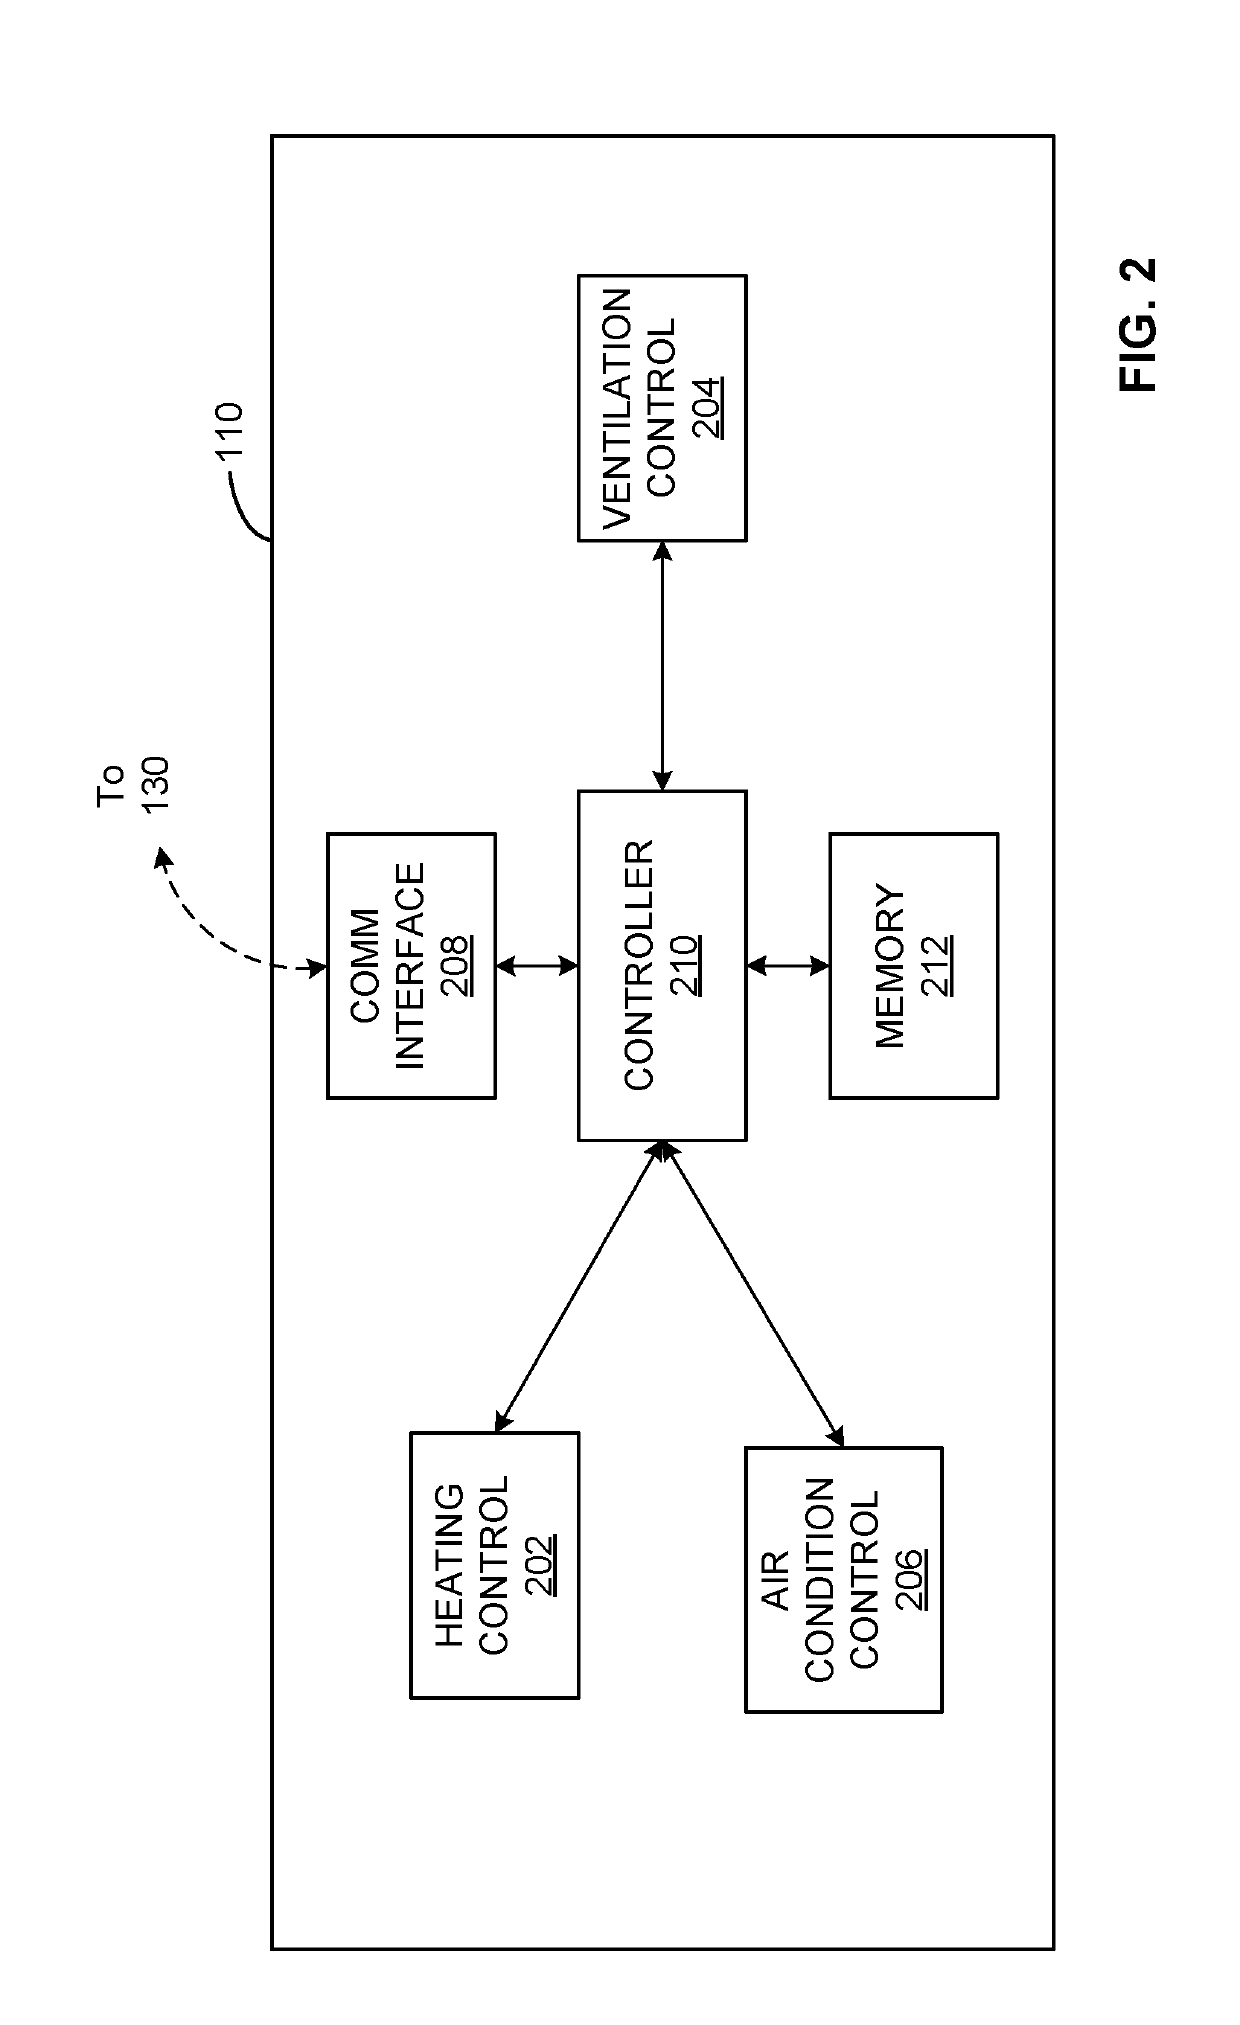 Apparatus and methods to synchronize edge device communications with a cloud broker